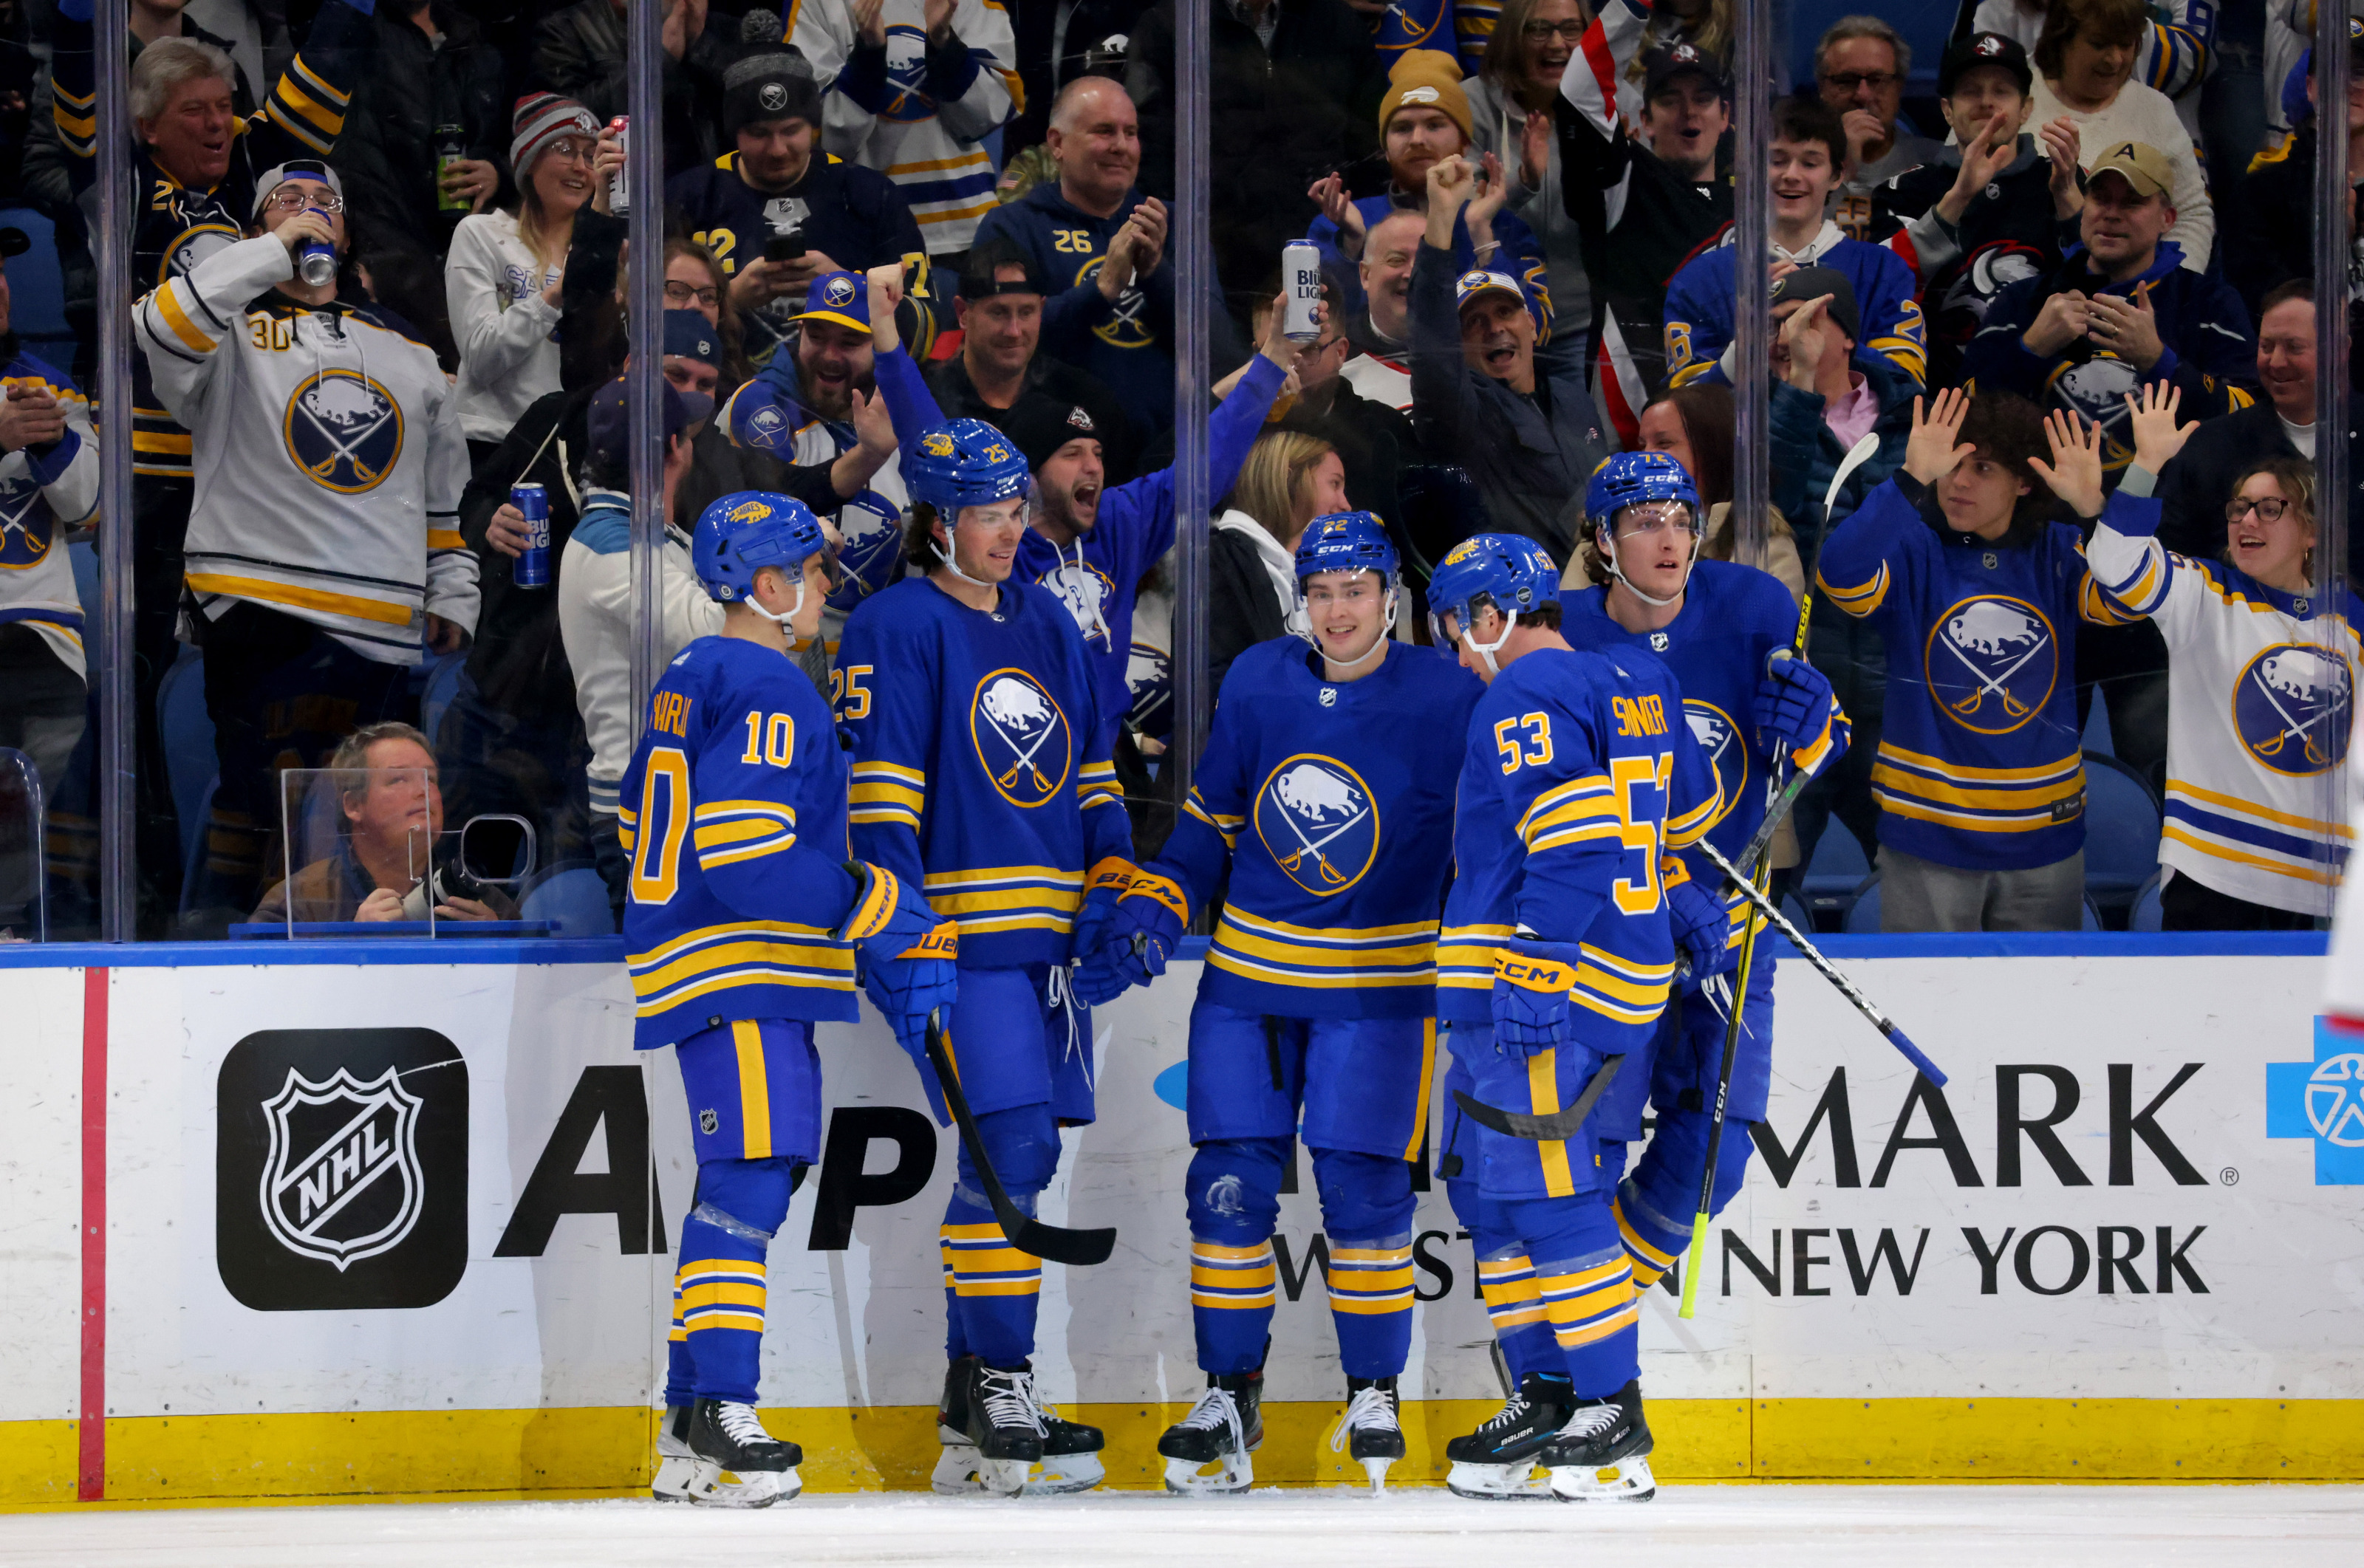 Fans return to Sabres games as team improves, but there still are